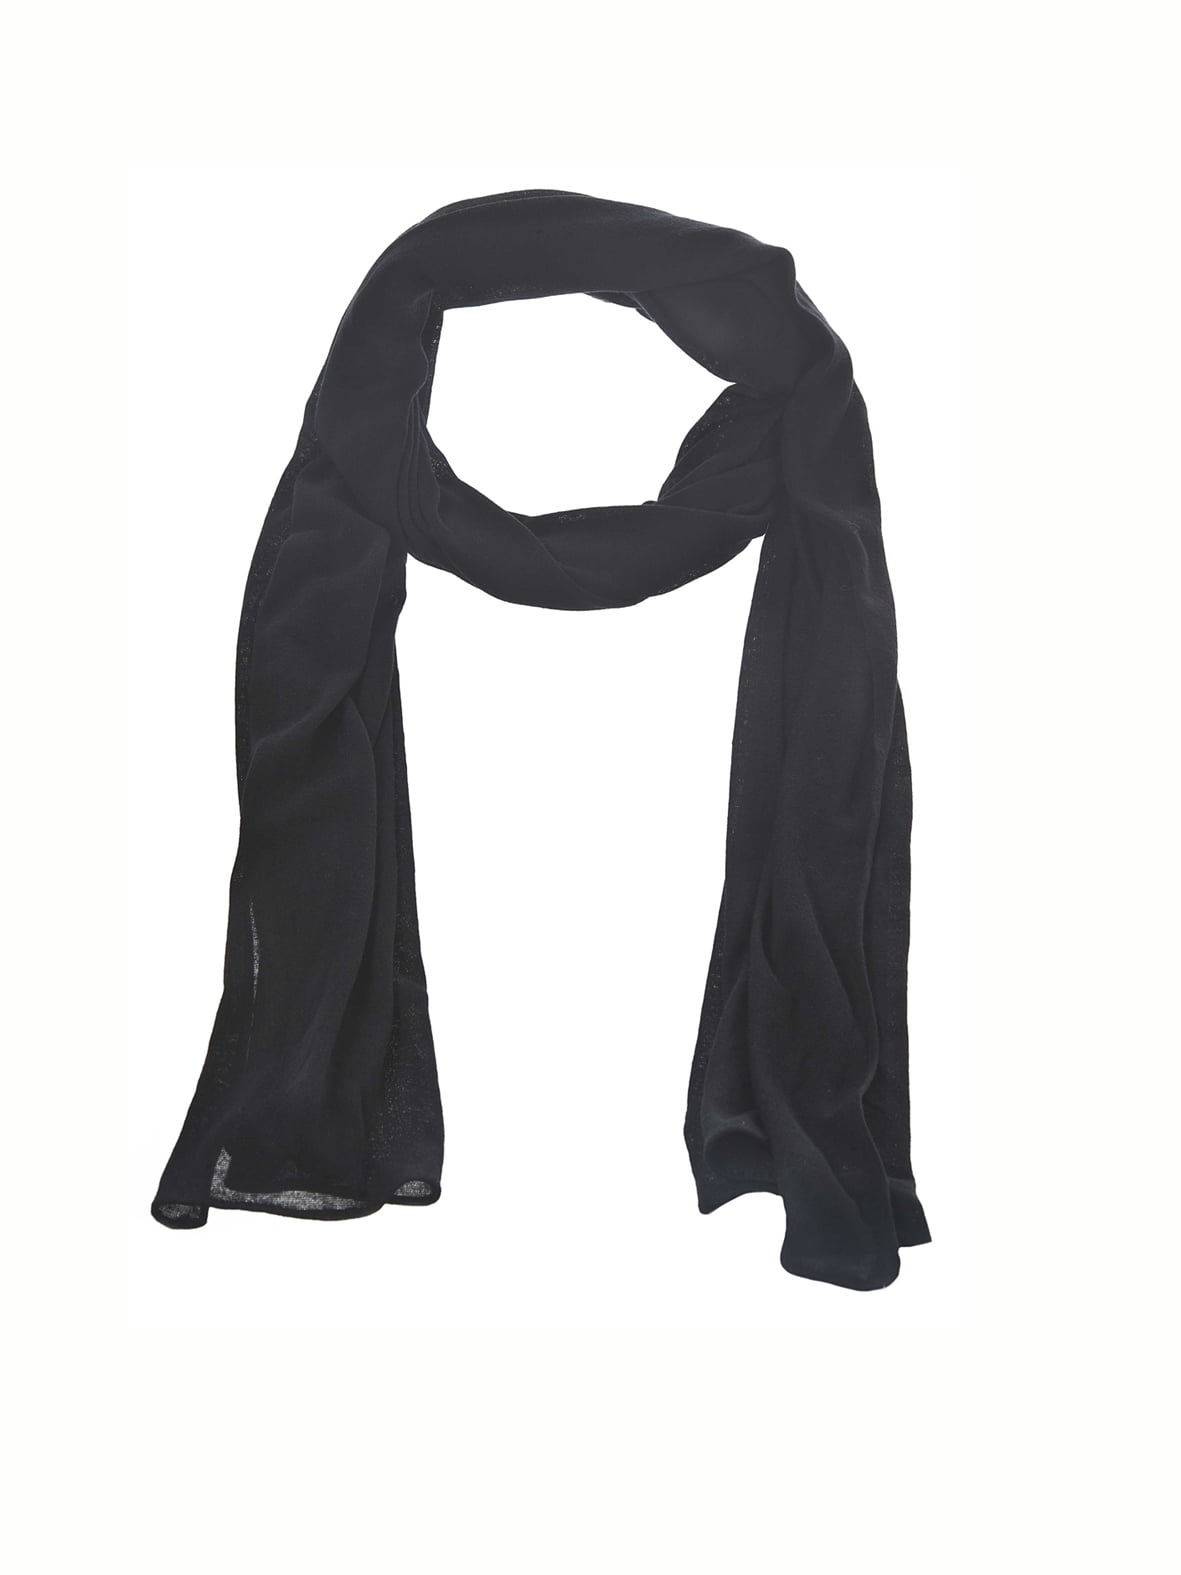 ladies scarf long black scarf with beads, Skinny scarf